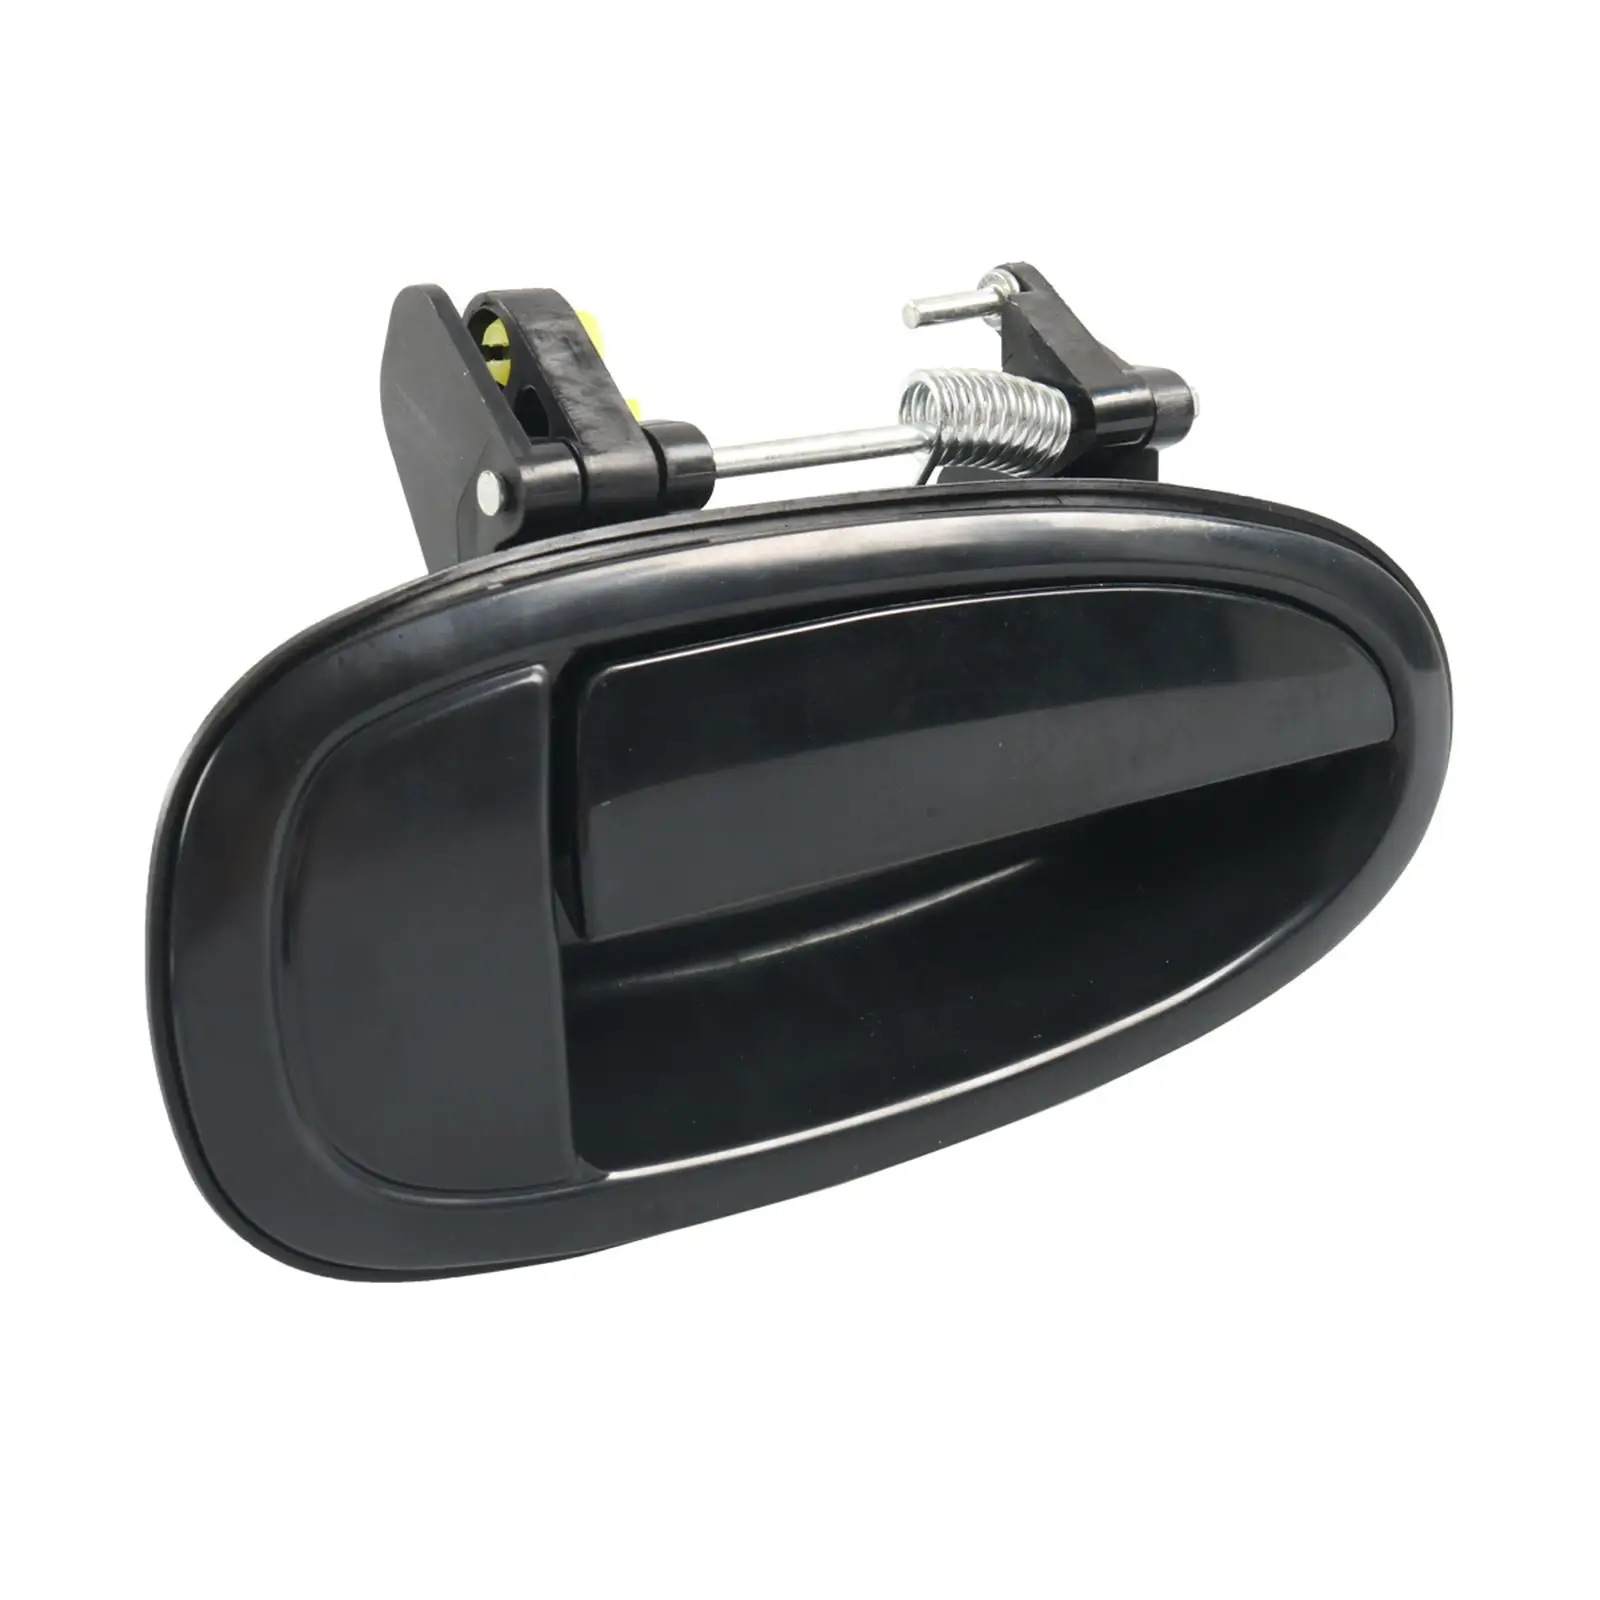 Right Rear handle for door 69230-Ac010Rr Replacement Easily Install Professional Automobile Accessory